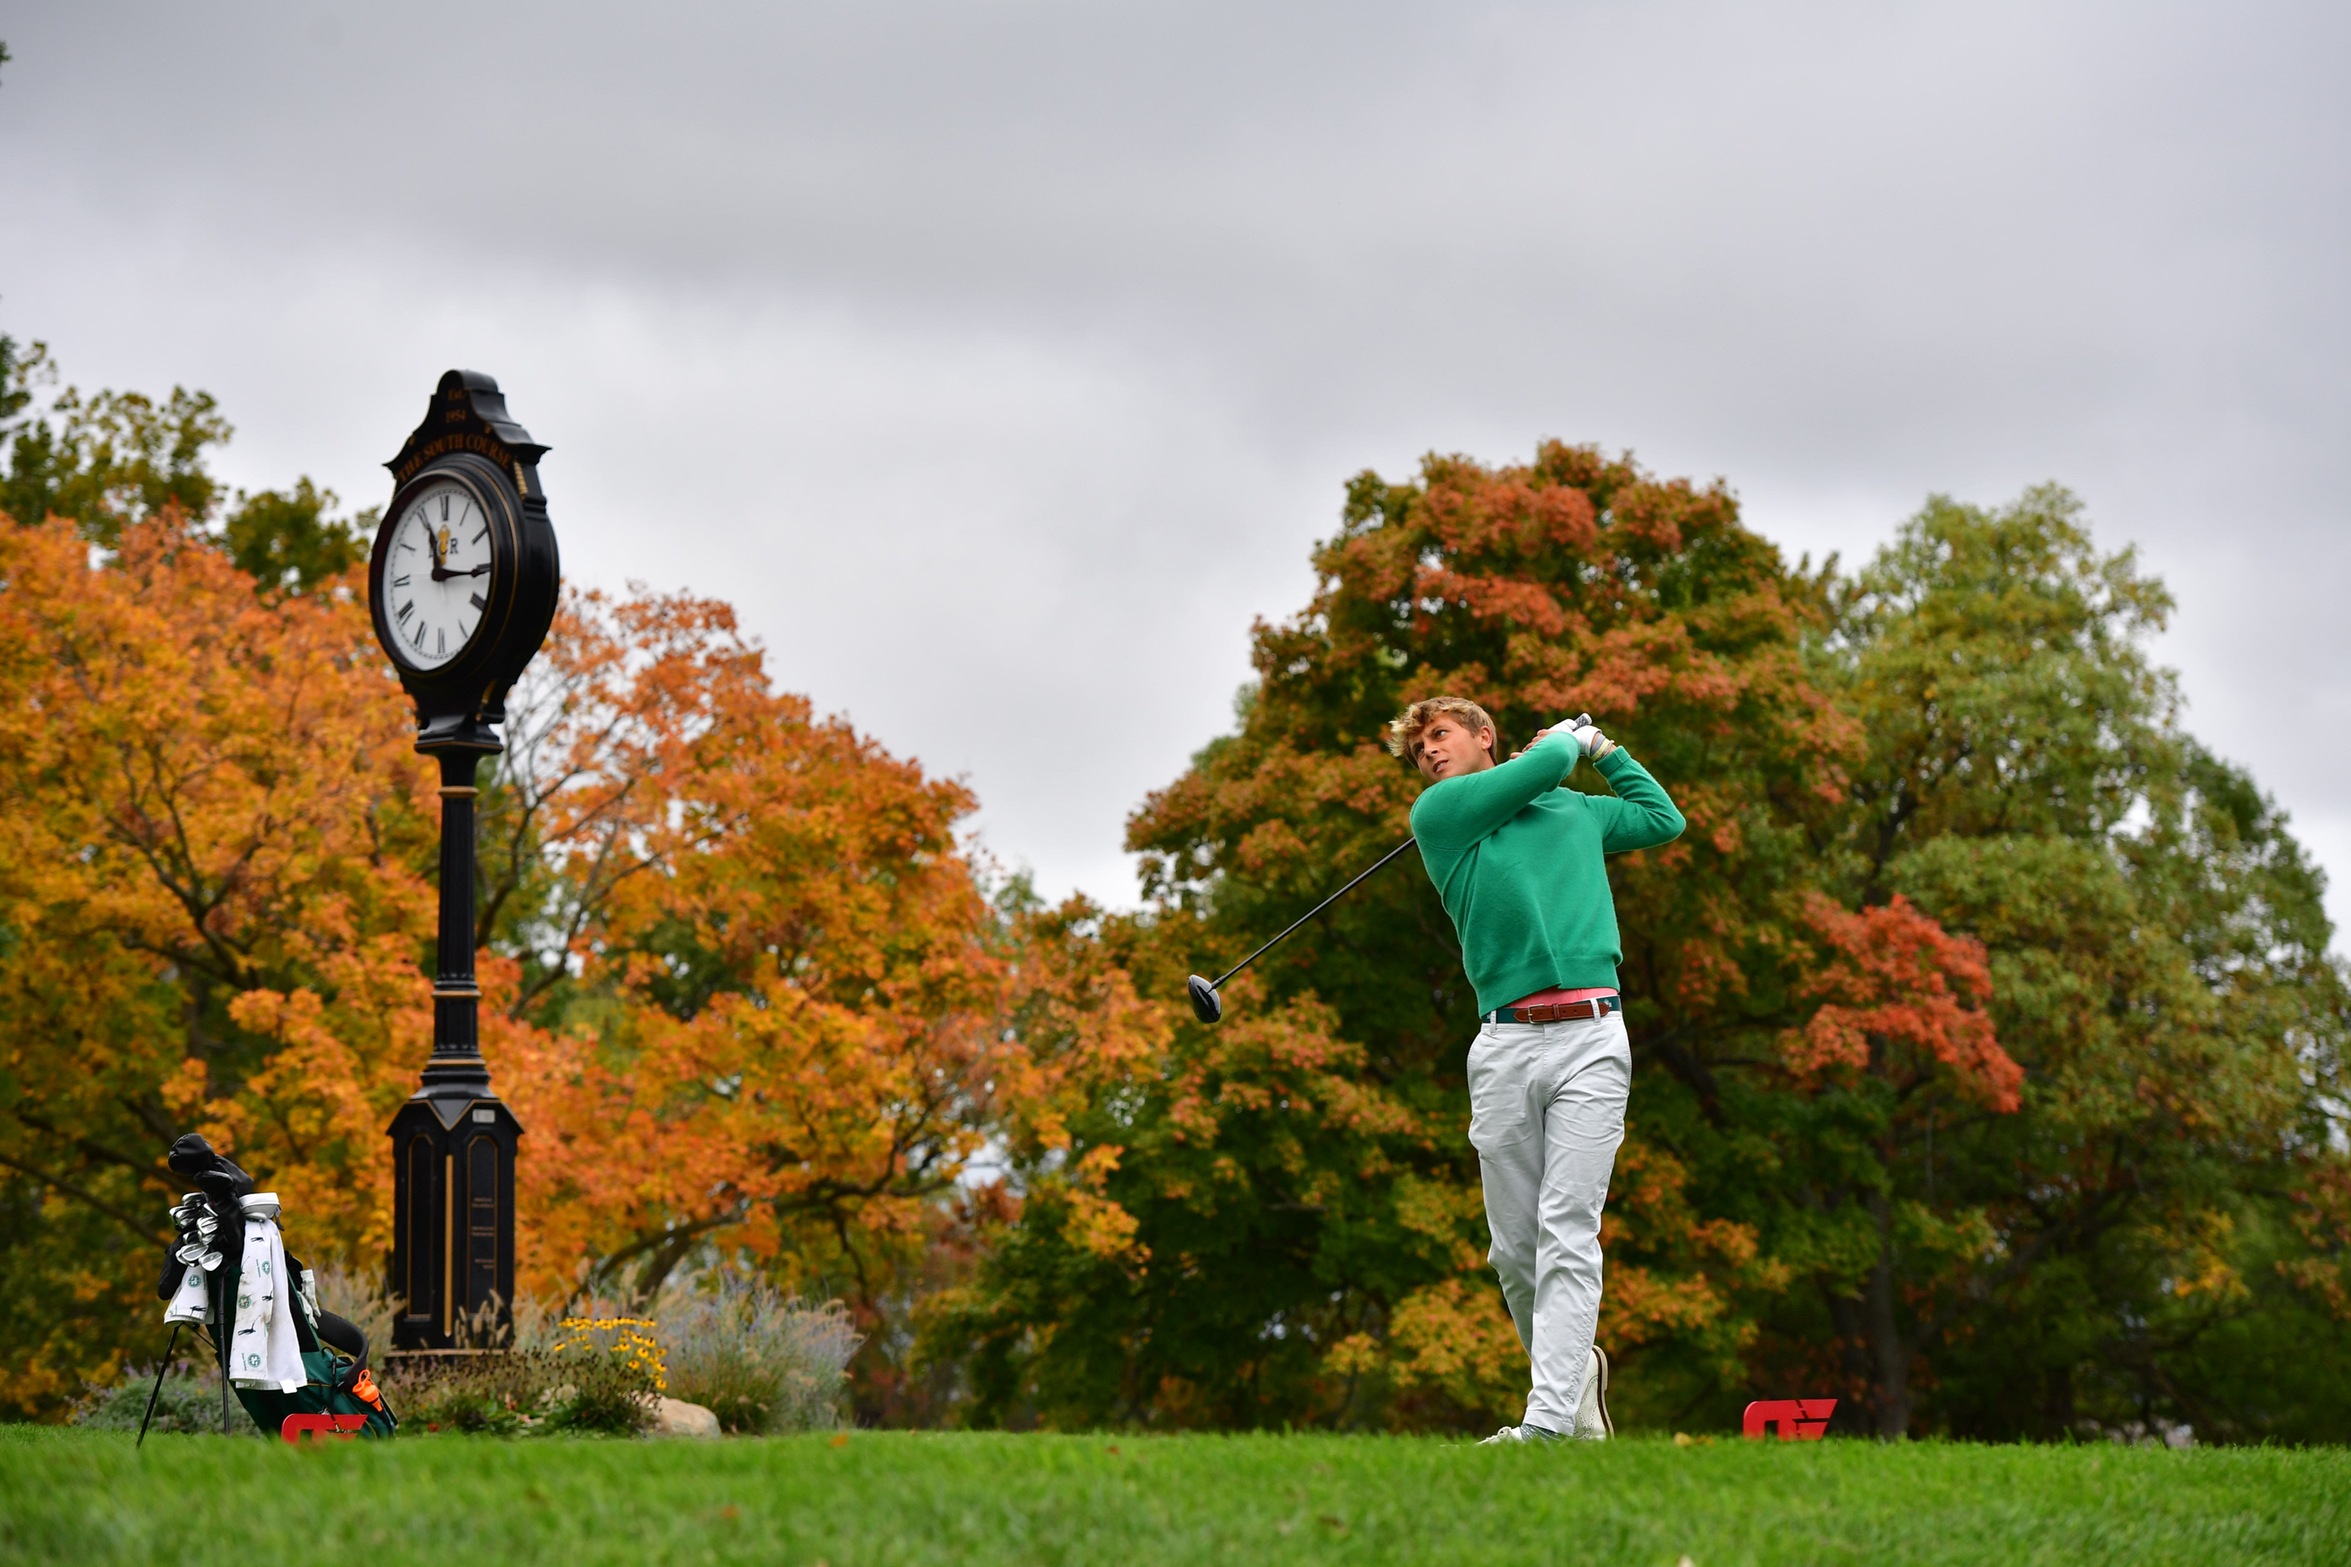 Cleveland State Men’s Golf Fourth, Simms Tied for Seventh after Day One of Bobby Nichols Intercollegiate